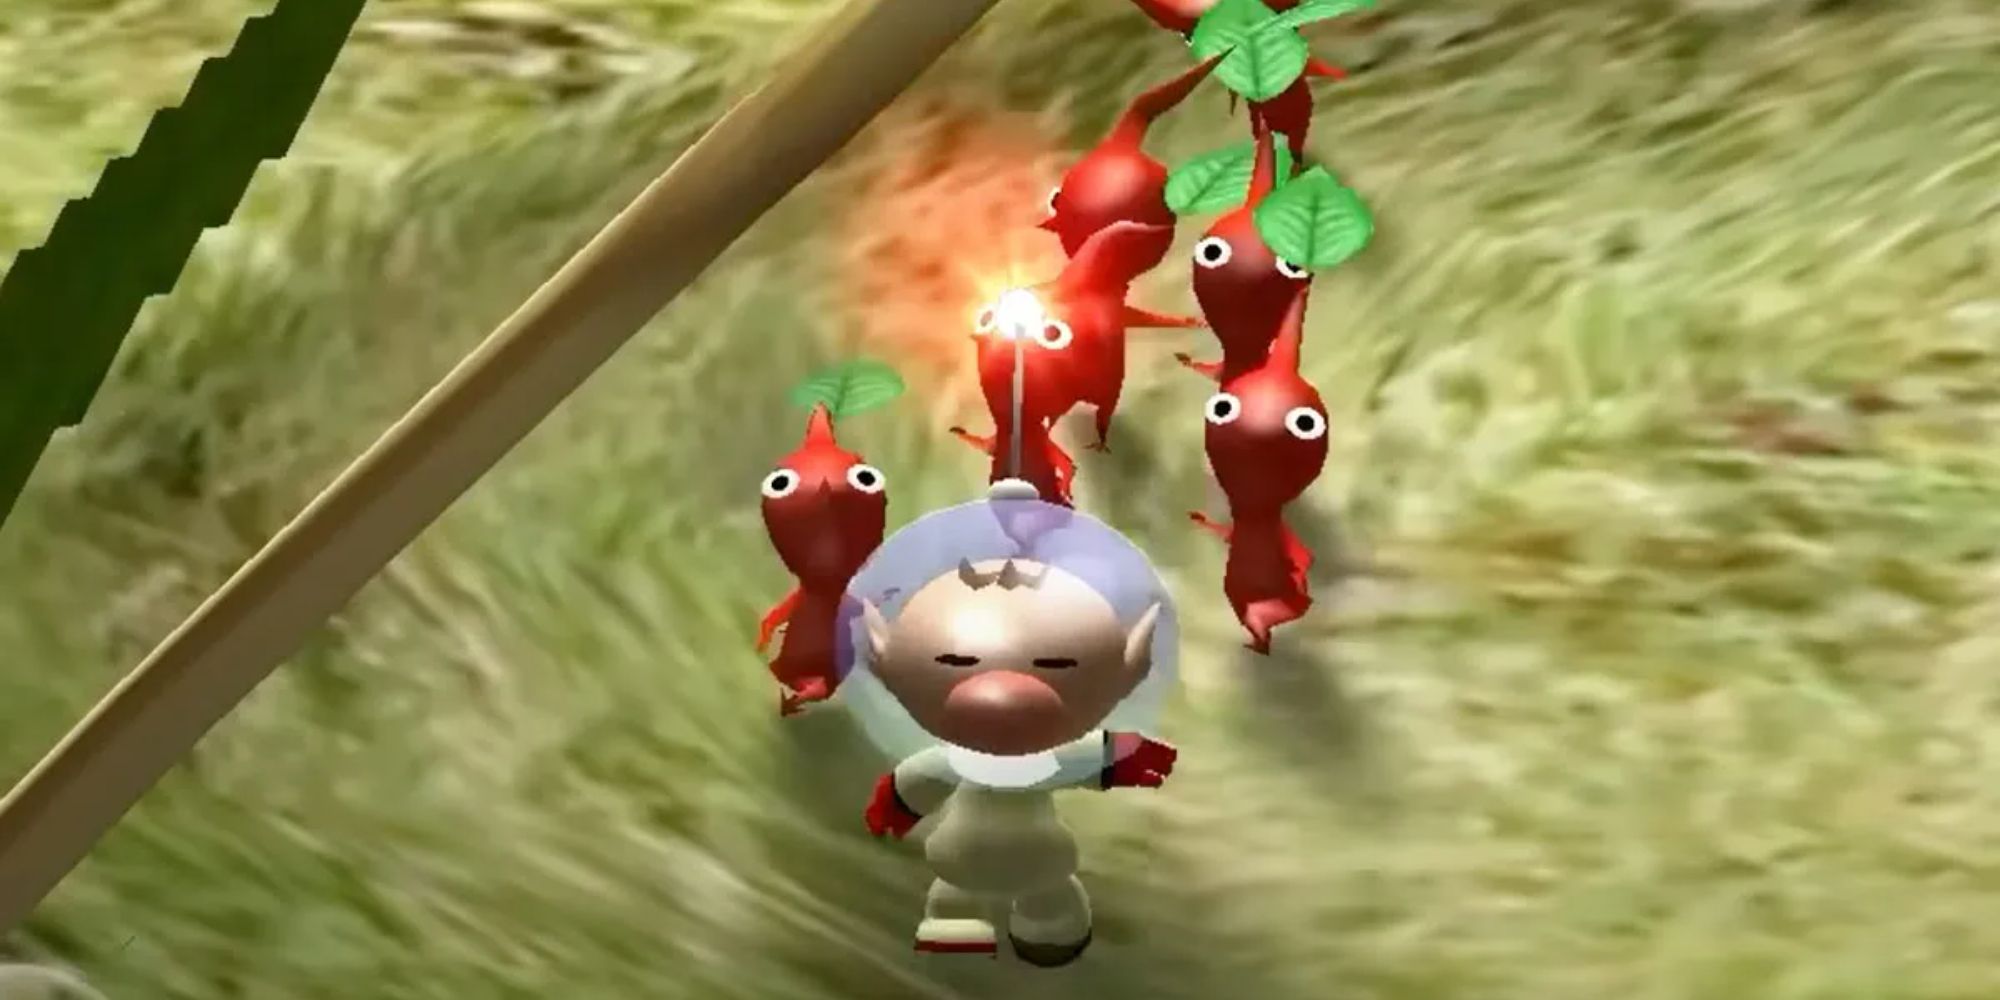 Olimar walking with red Pikmin